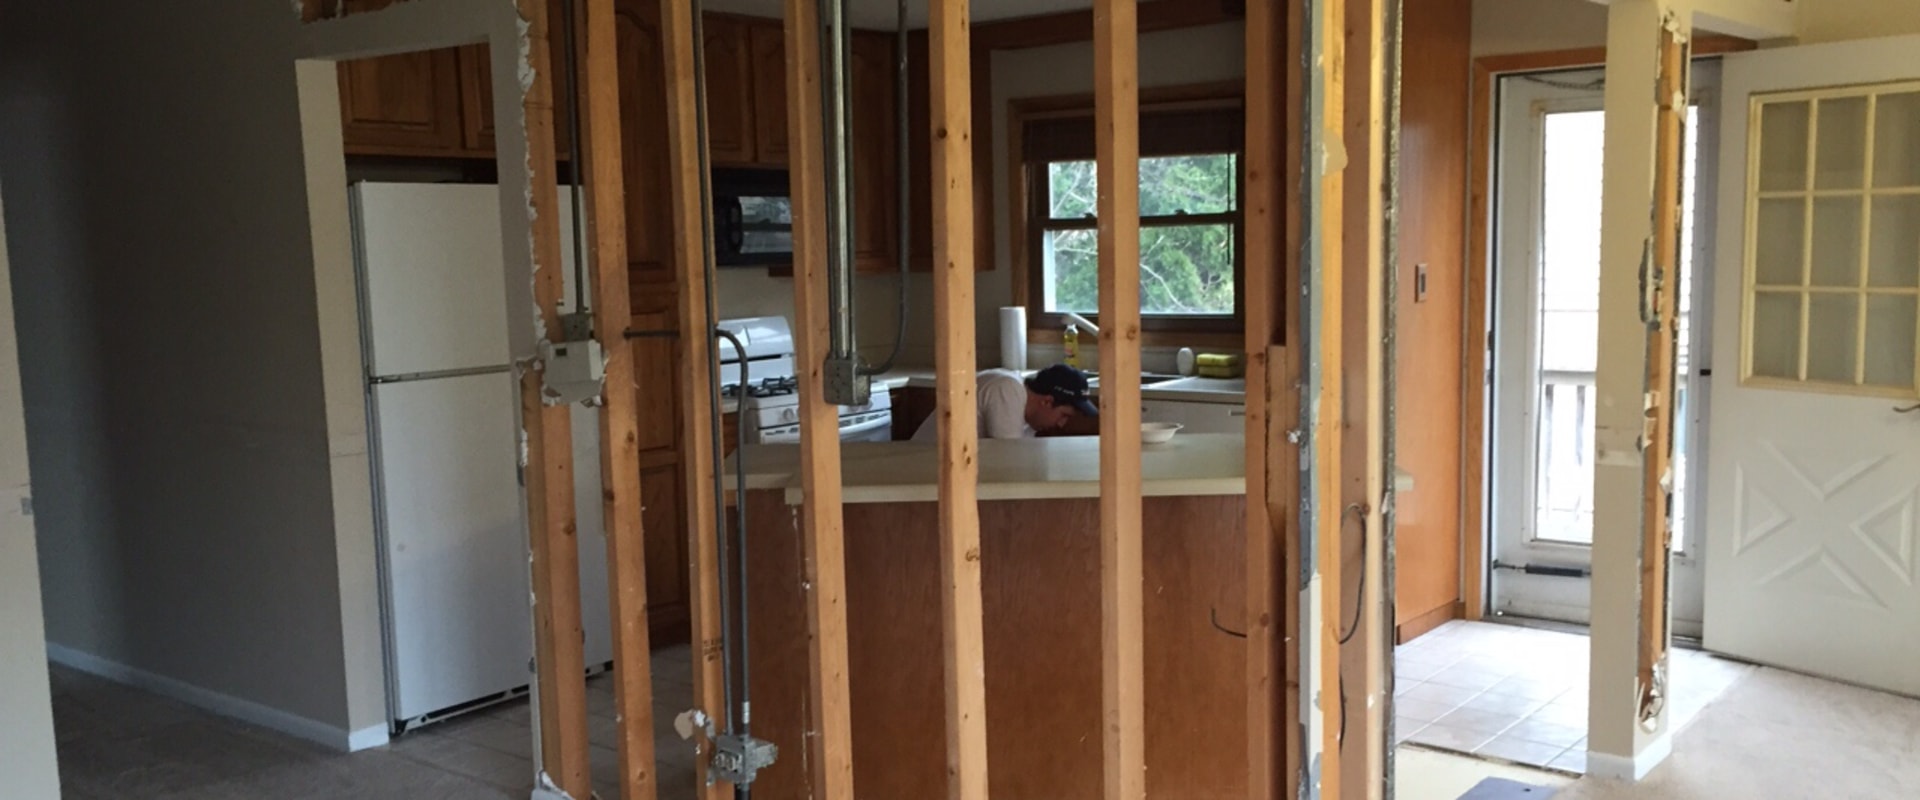 The Benefits and Considerations of Removing a Load-Bearing Wall